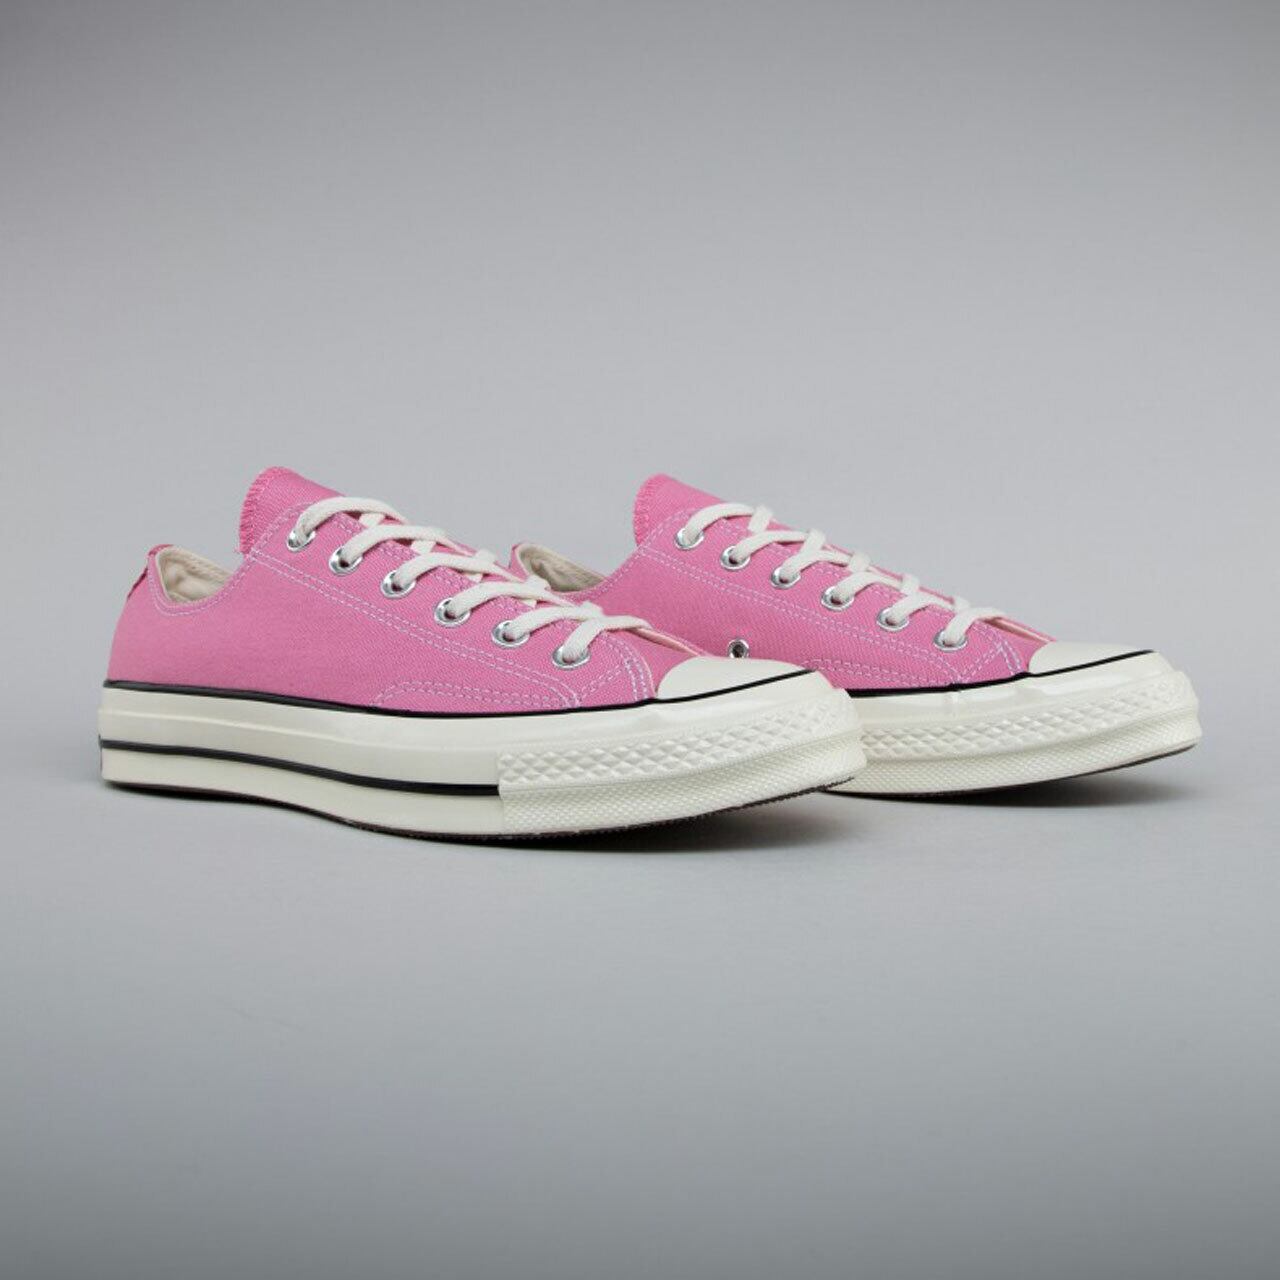 CONVERSE / CHUCK TAYLOR 70 OX -CHATEAU ROSE/EGRET/BLACK- | THE NEWAGE CLUB